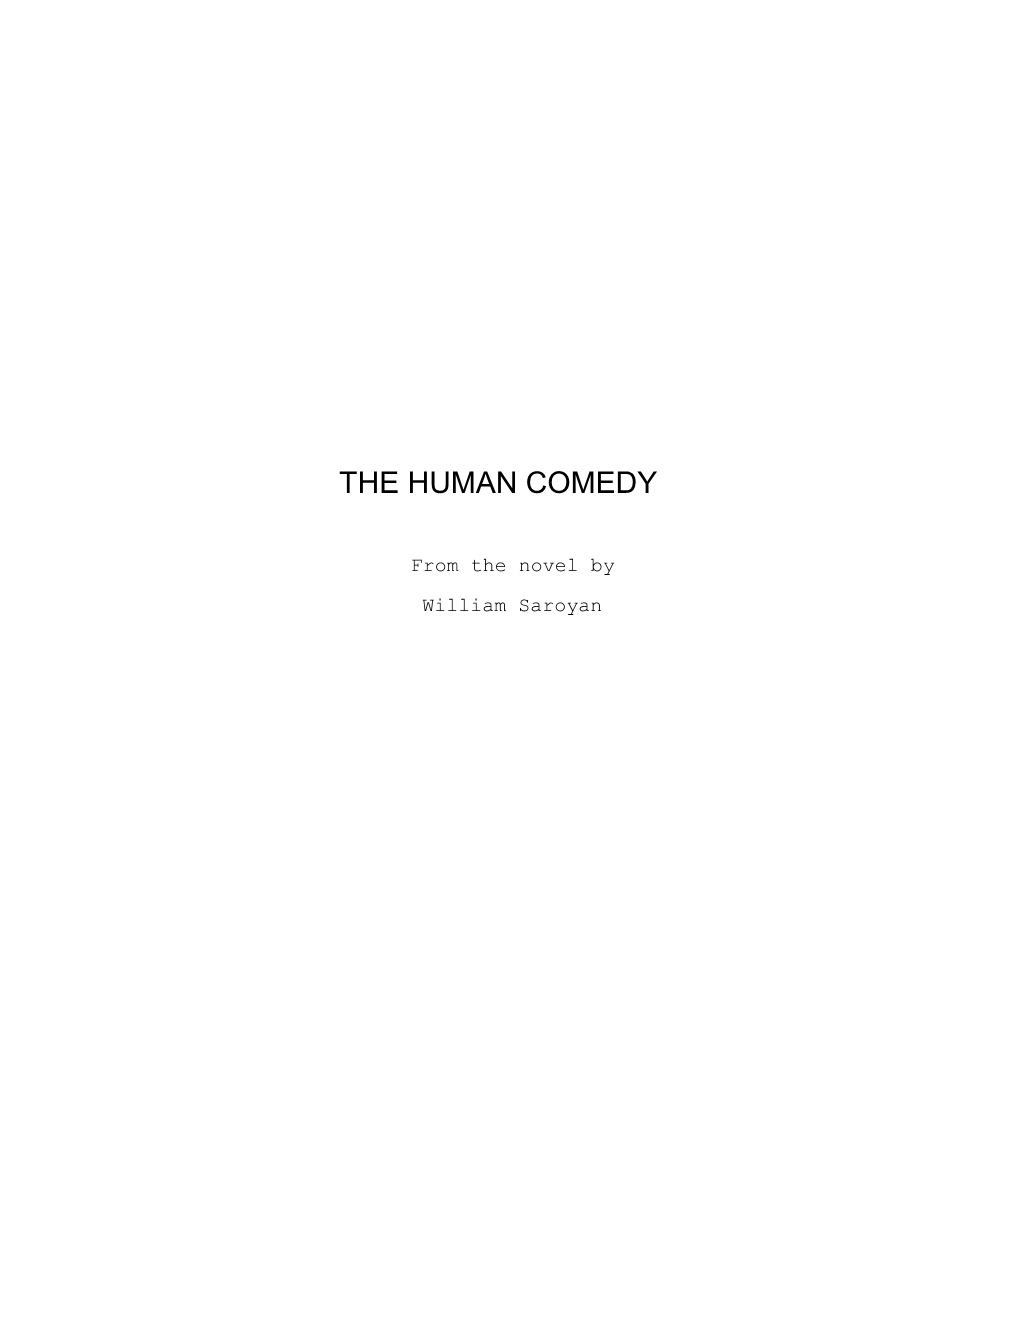 The Human Comedy